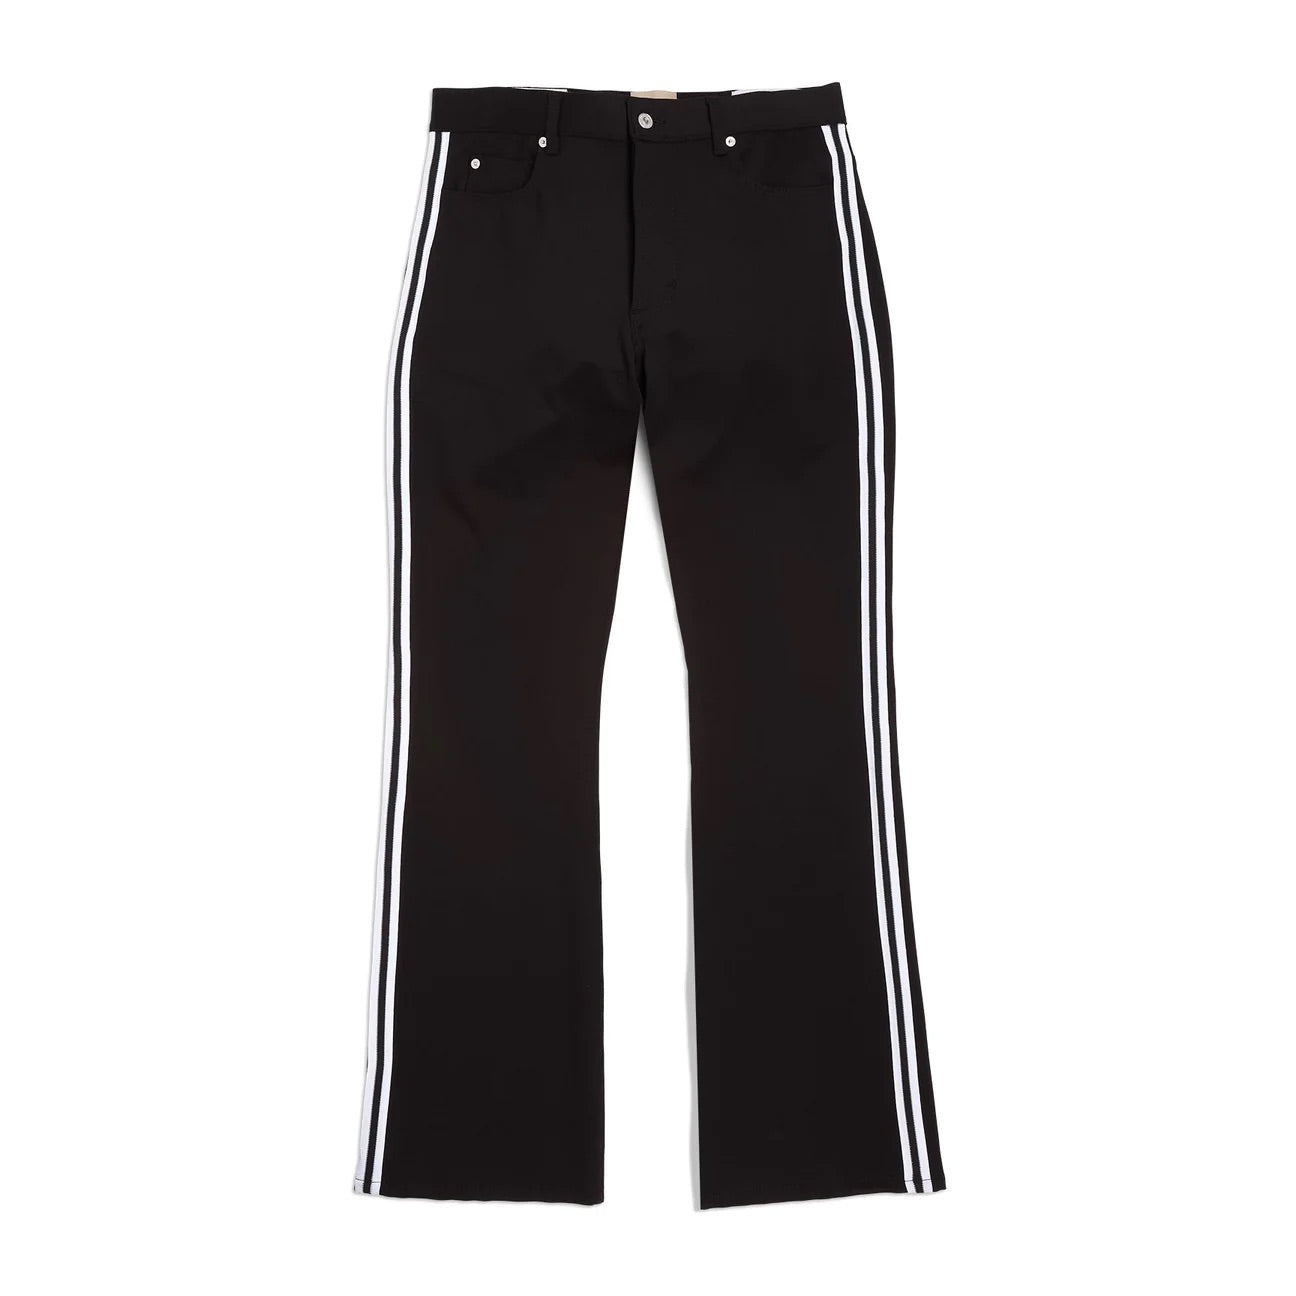 GALLERY DEPT POLY FLARE PANTS